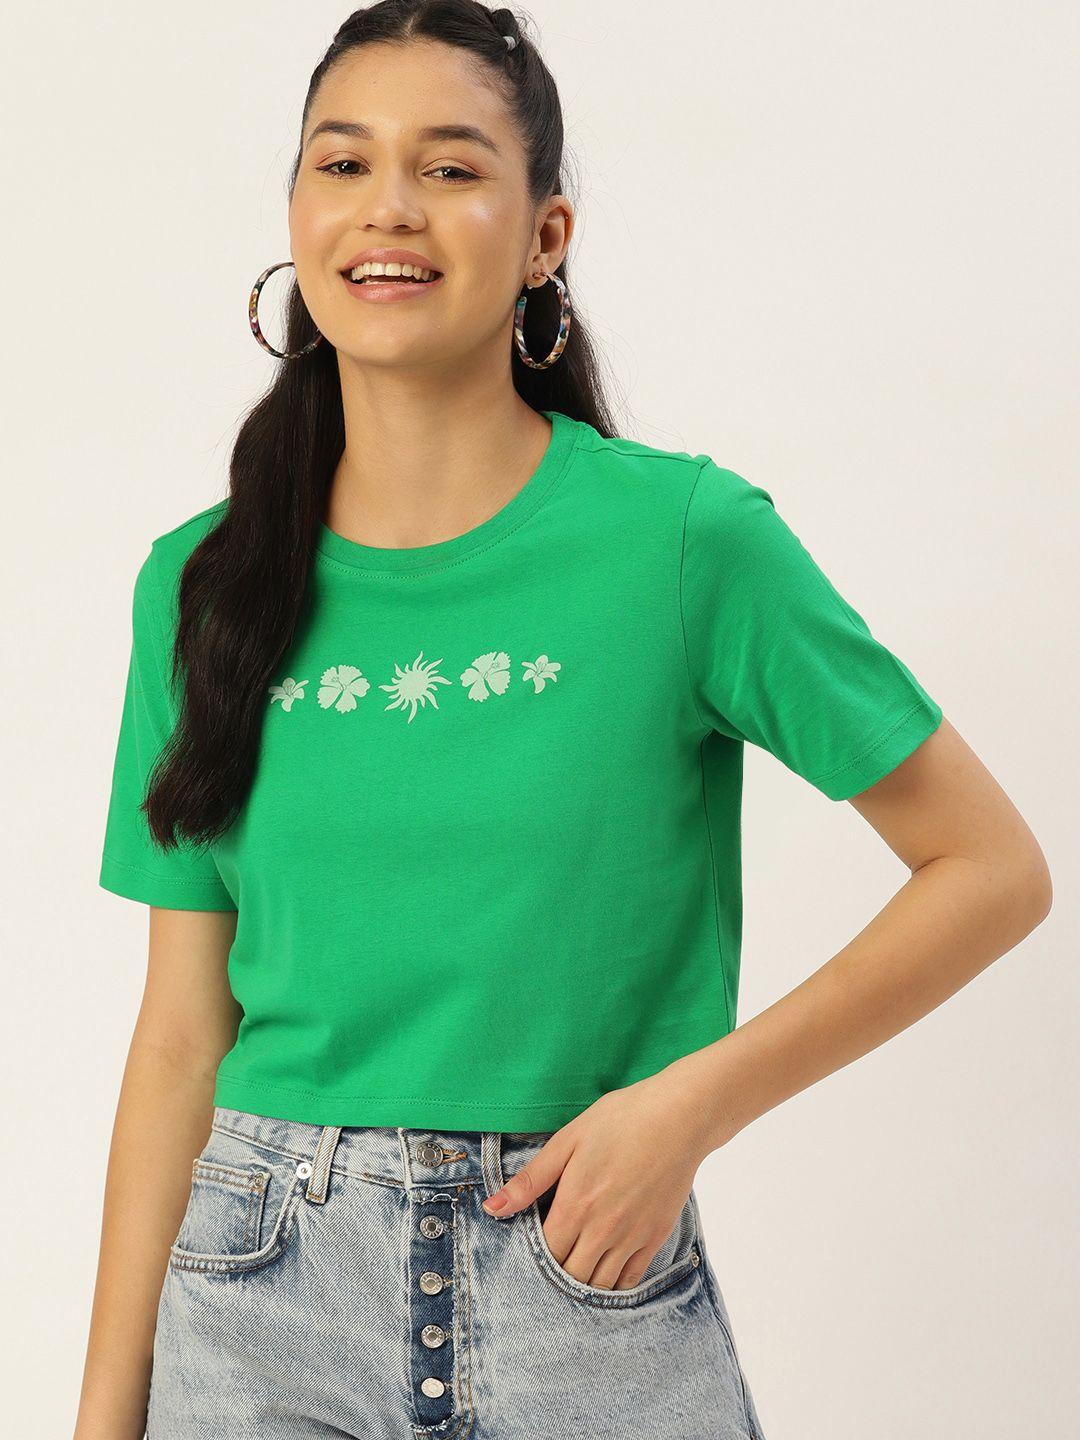 dressberry graphic printed boxy crop top